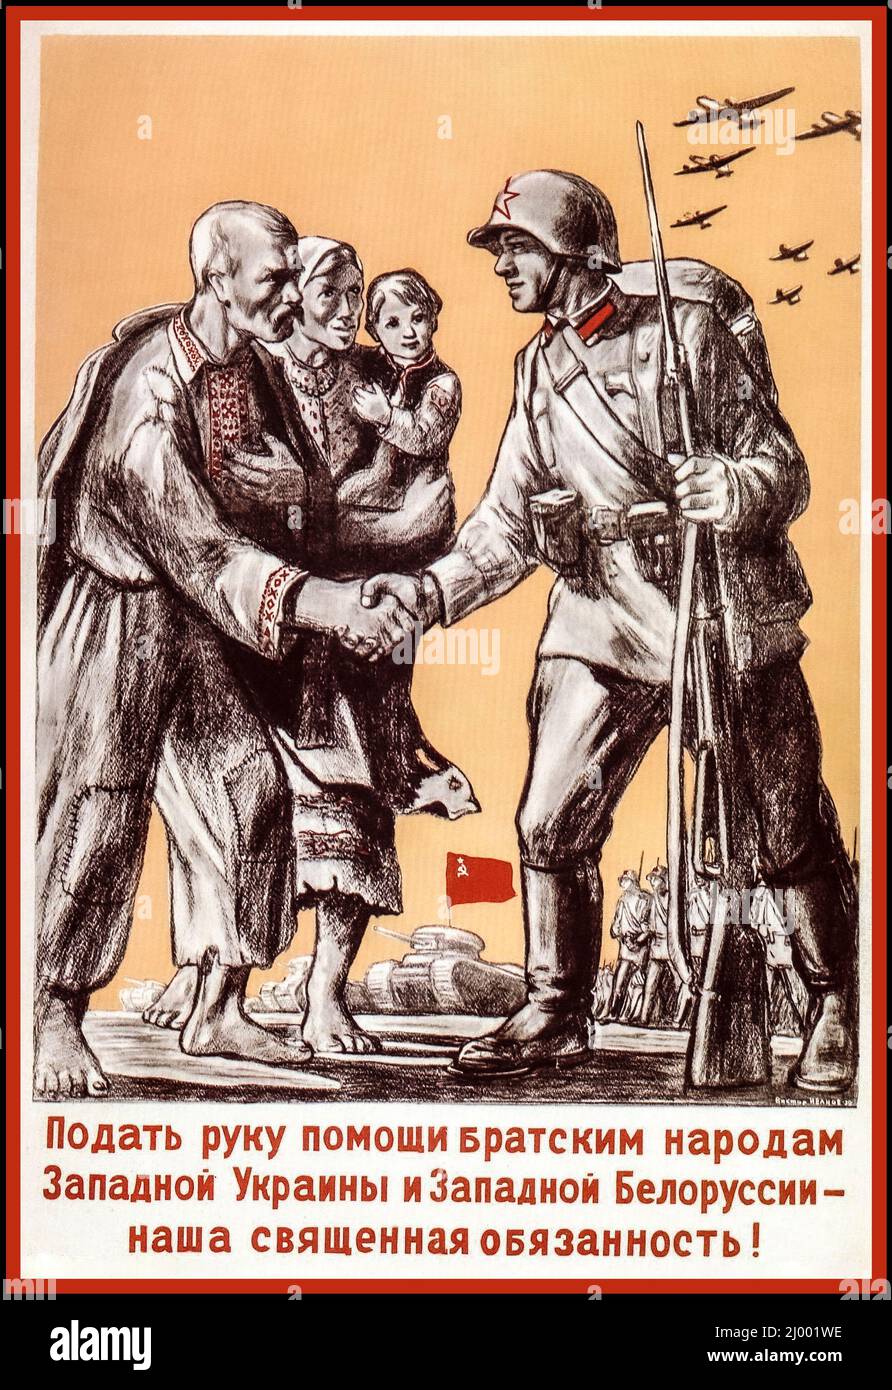 Vintage 1939 WW2  Russian Soviet Poster 'To lend a willing hand to the brotherly nations of Western Ukraine and Western Belarus - is our sacred duty! '- Soviet Union, 1939 Second World War World War II Stock Photo